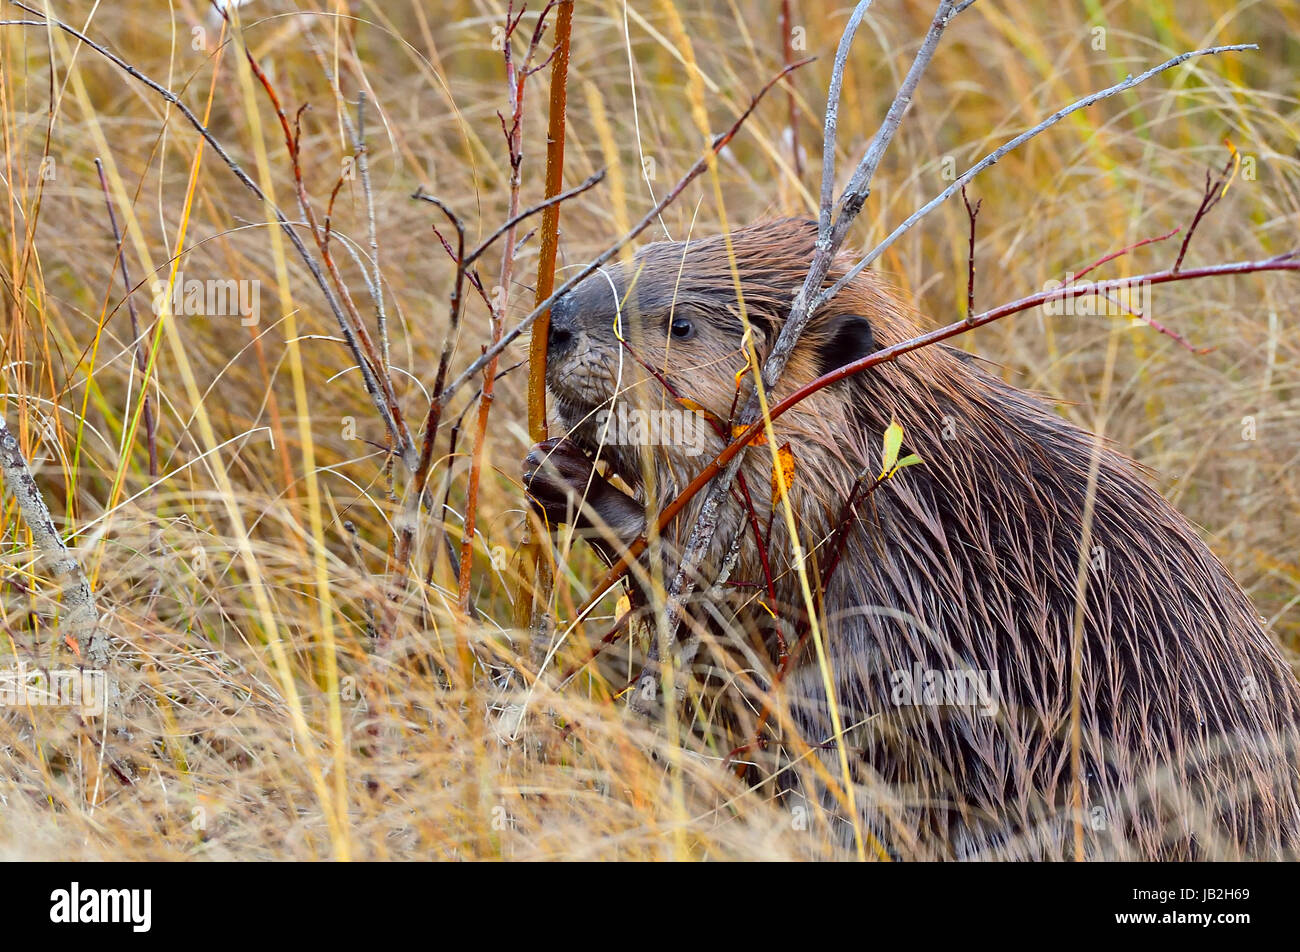 A wild beaver (Castor canadensis) about to cut a willow sapling for food Stock Photo